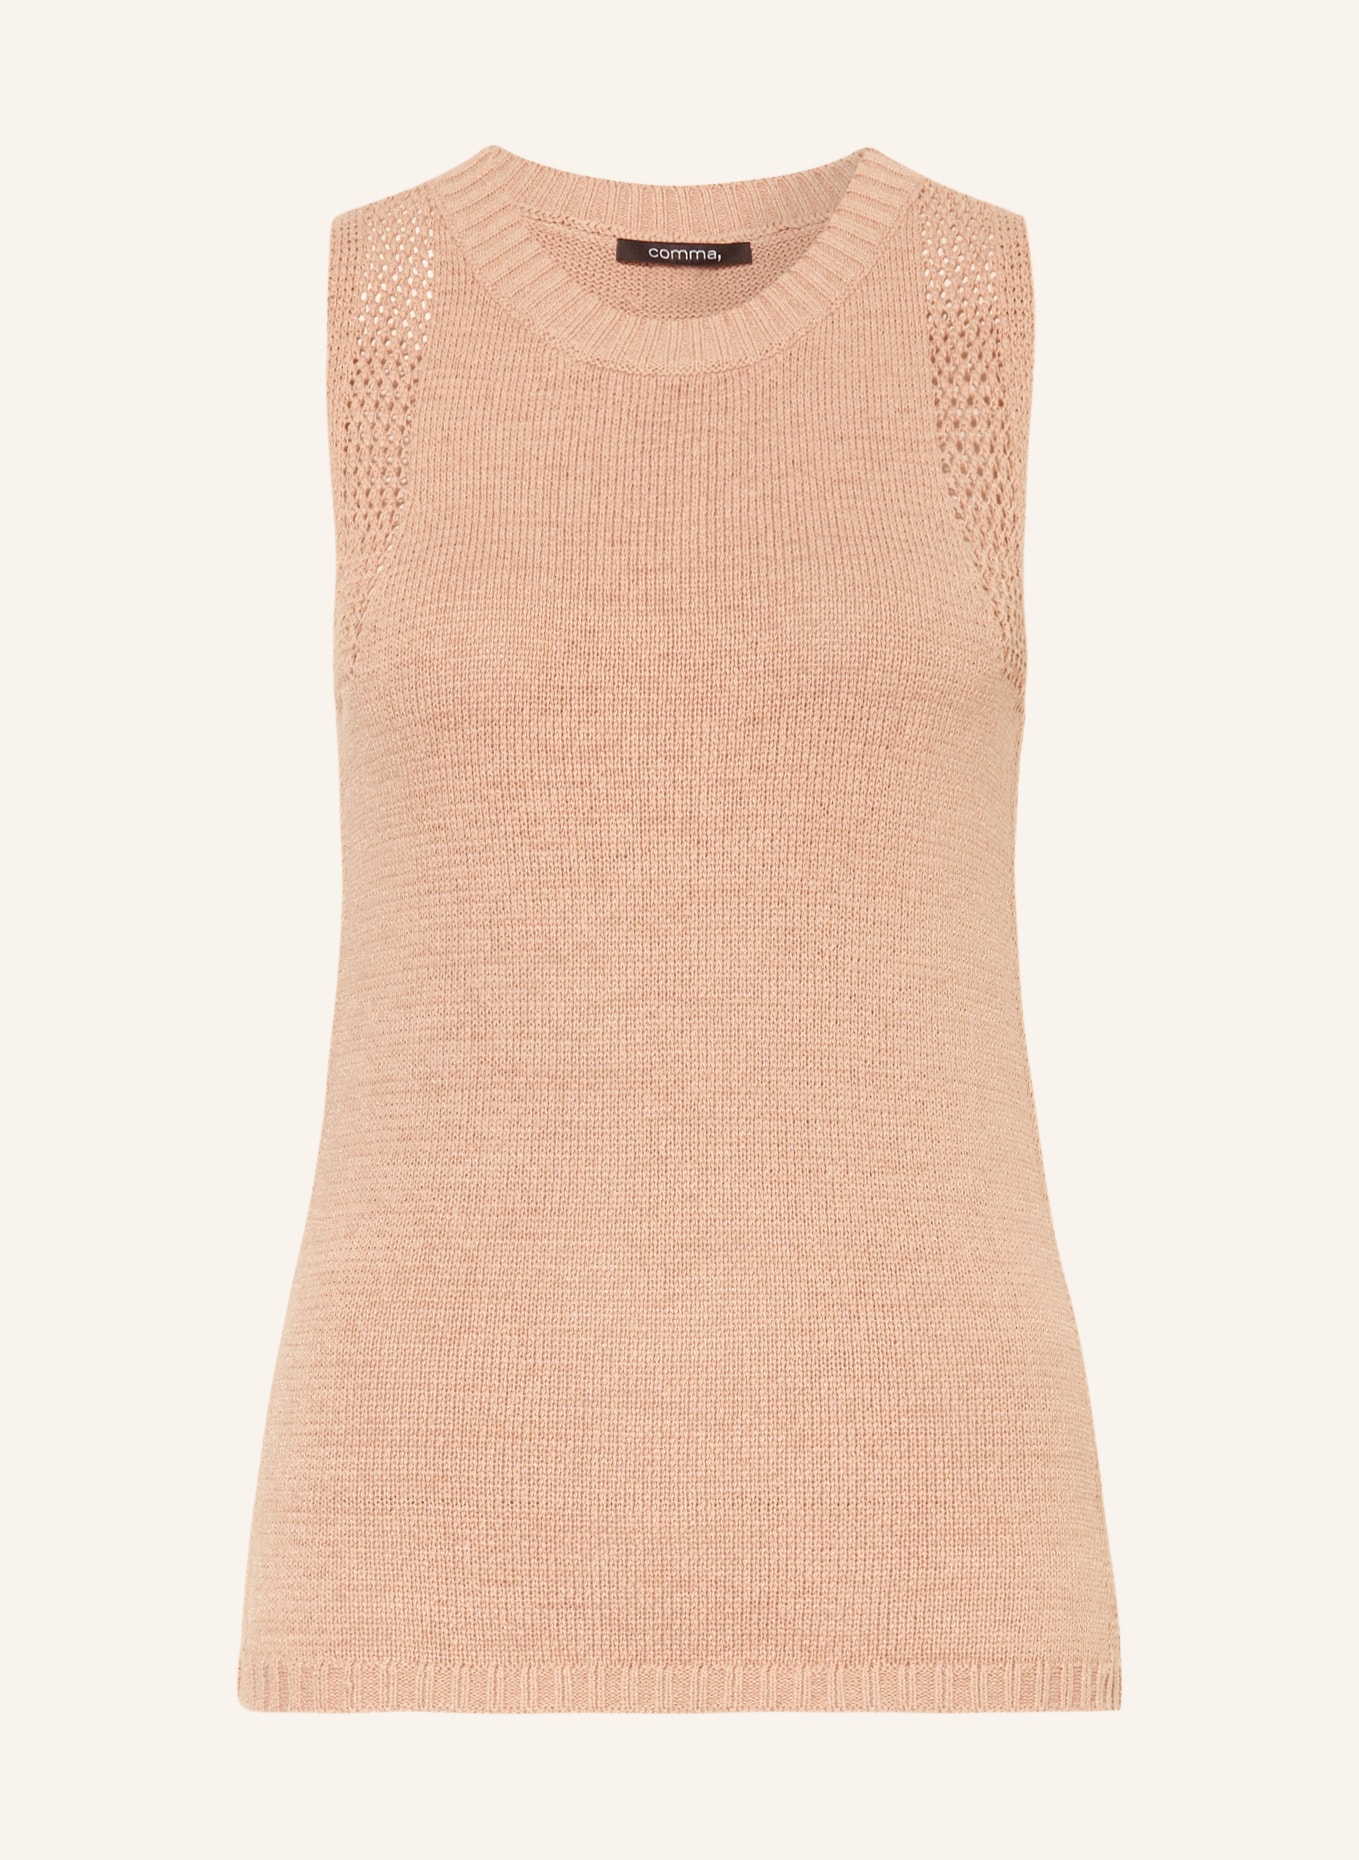 comma Knit top, Color: LIGHT BROWN (Image 1)